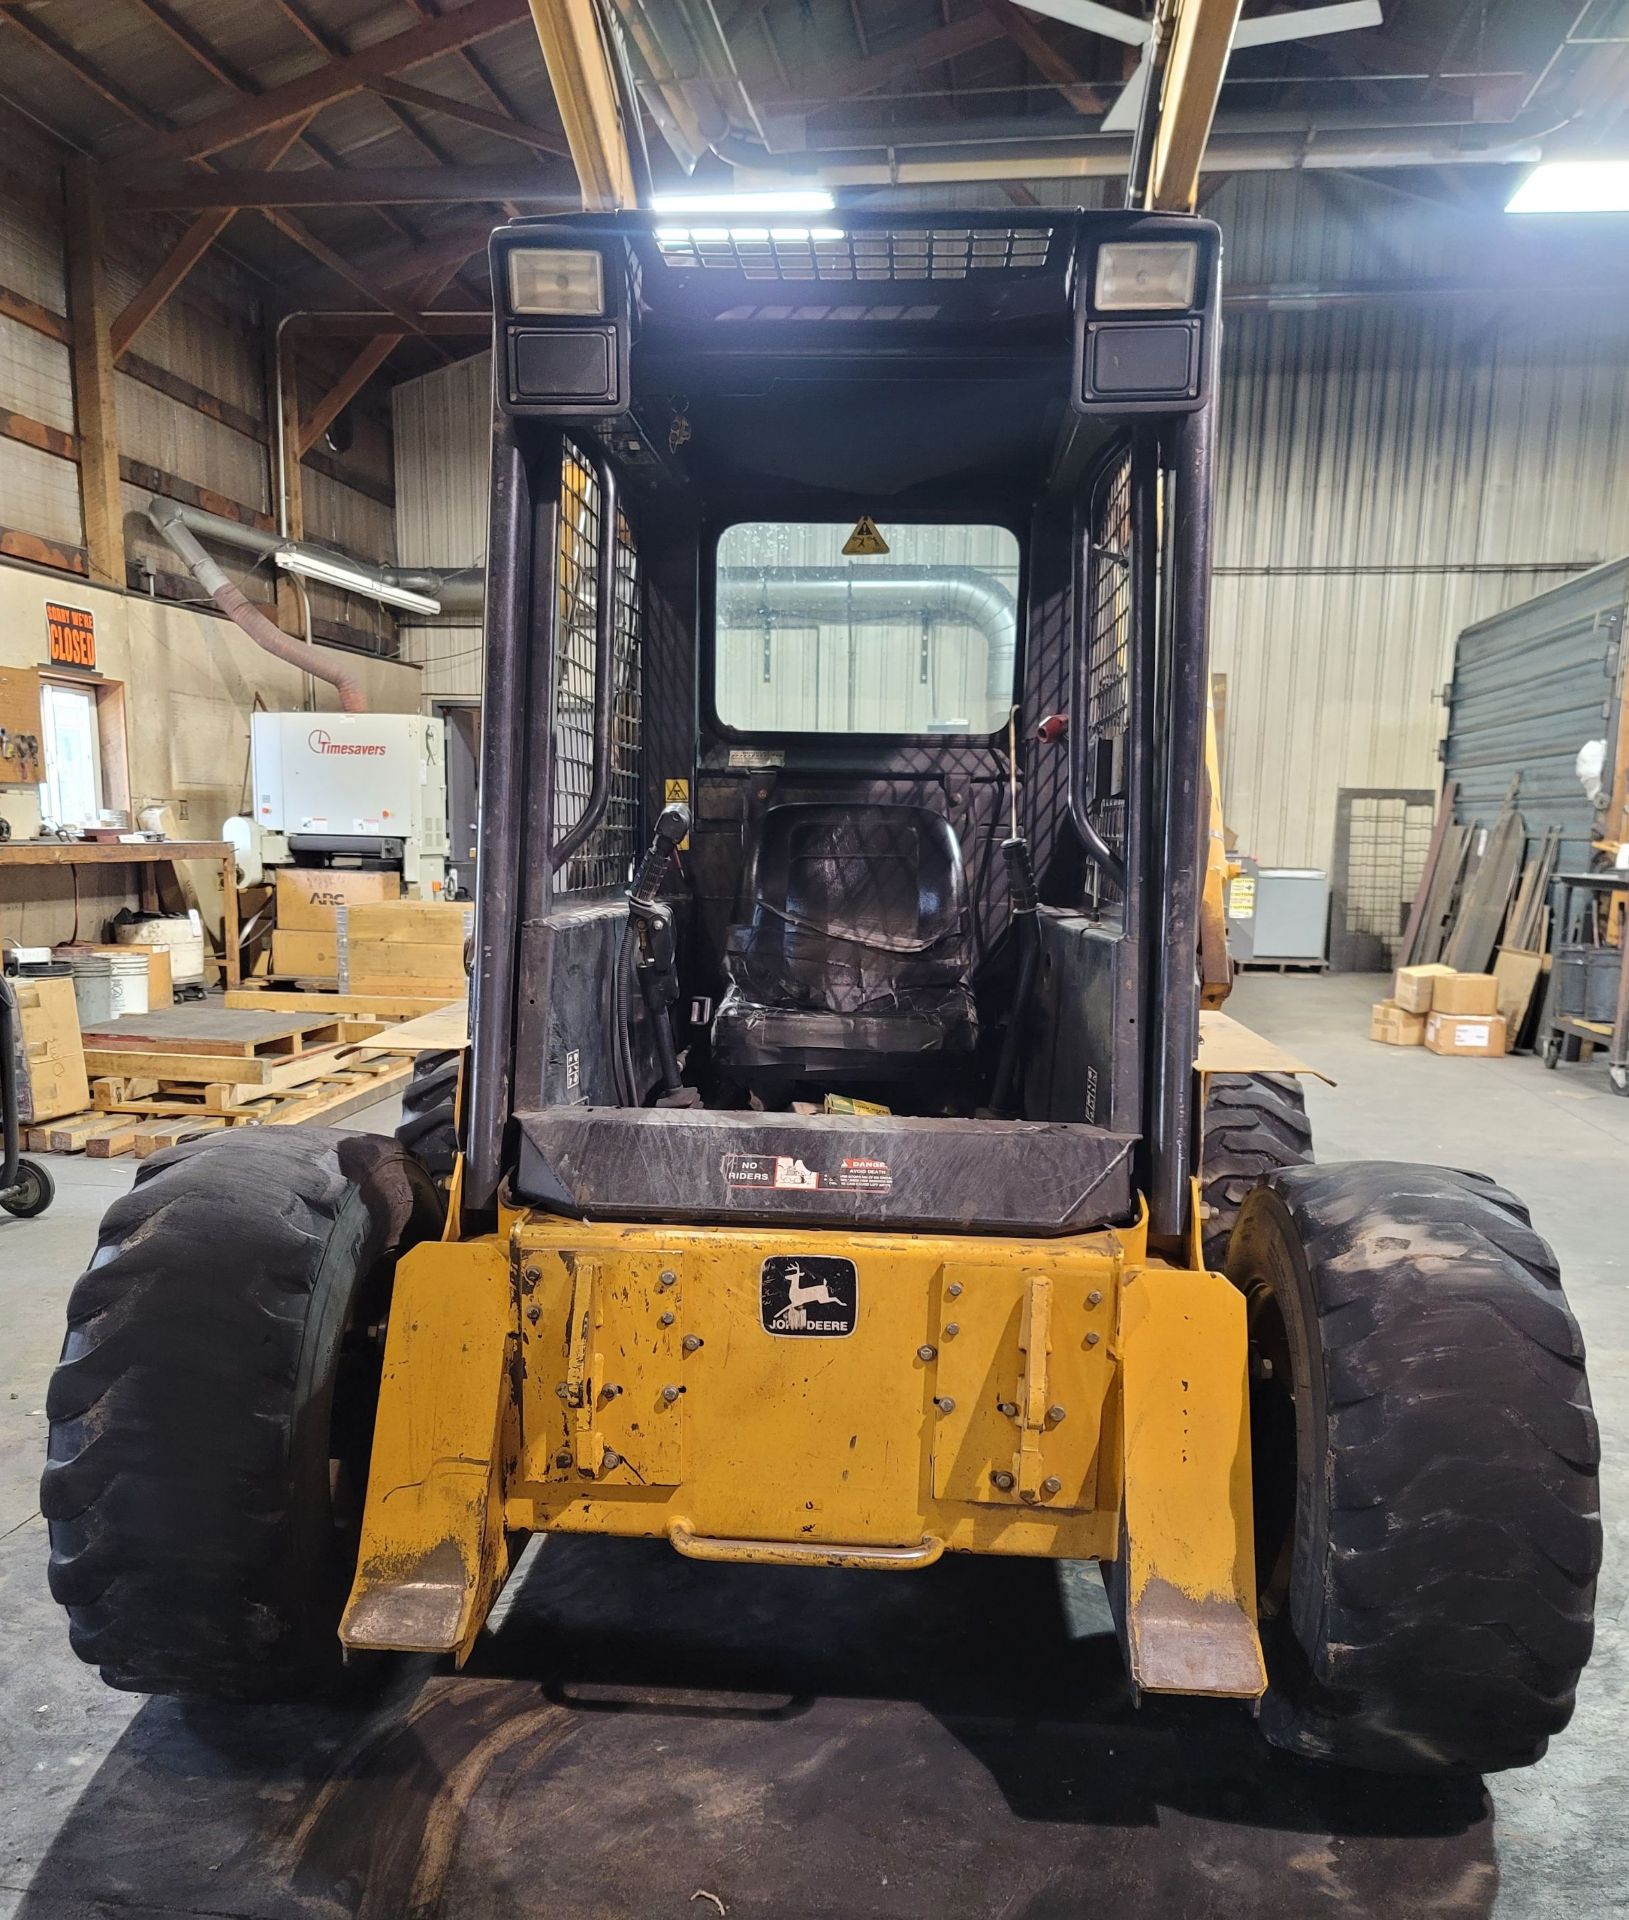 1998 JOHN DEERE 8875 ALL TERRAIN SKID STEER, WITH (5) ATTACHMNETS. SEE PICTURES. - Image 9 of 22